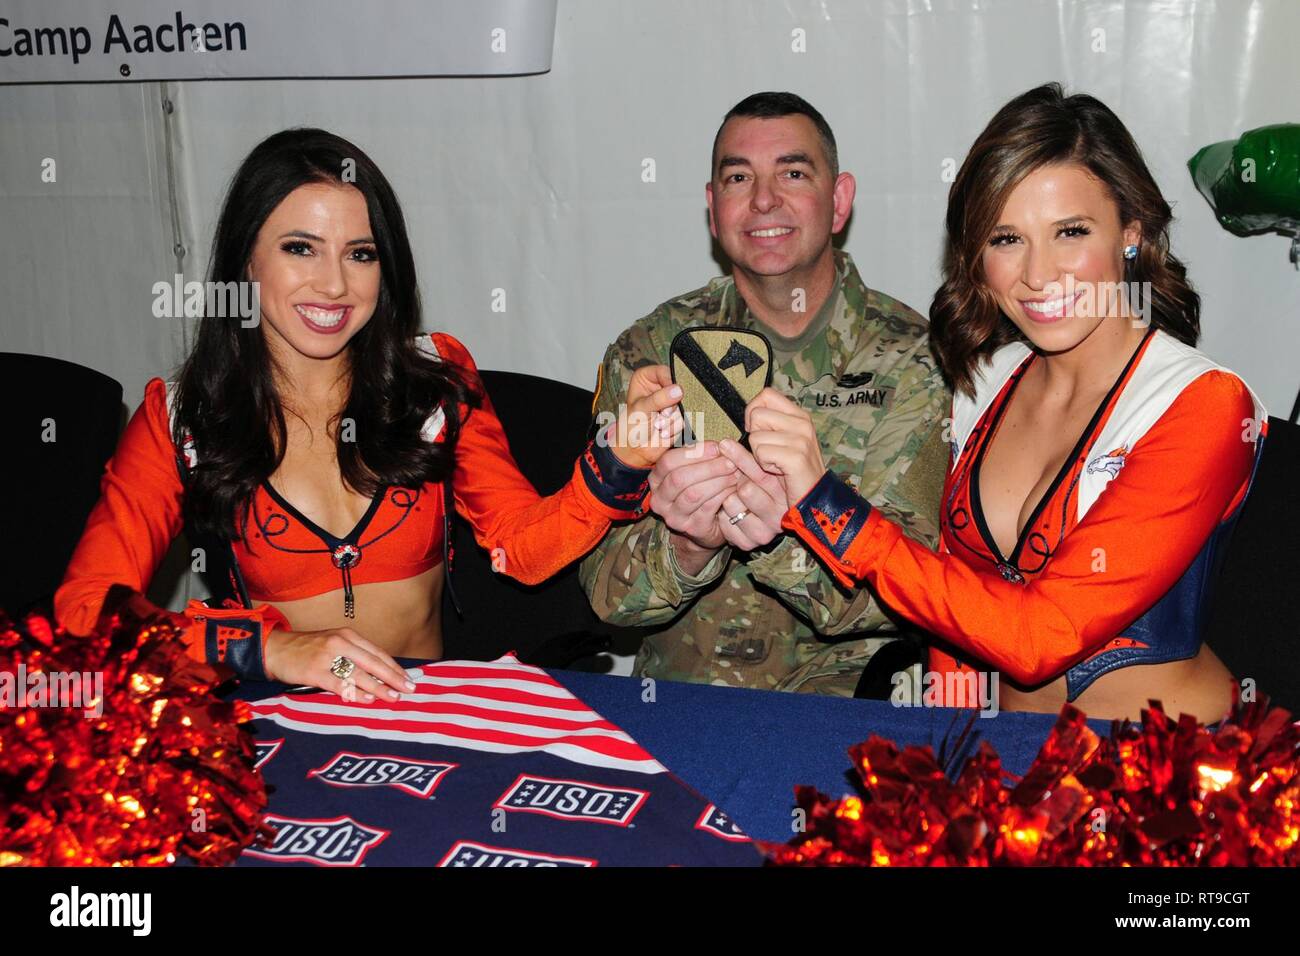 U.S. Army Chief Warrant Officer 3 Michael Hamilton assigned to the 1st Armored Brigade Combat Team, 1st Cavalry Division poses with cheerleaders holding his 1st Cavalry patch as part of a USO meet and greet with the Denver Broncos cheerleaders, mascot and Alumni football players at Camp Aachen's USO annex in Grafenwoehr, Germany, Jan. 26, 2019.   IRONHORSE deployed in support of Atlantic Resolve, an enduring exercise to improve interoperability between U.S. Forces, their NATO allies and partners. Stock Photo